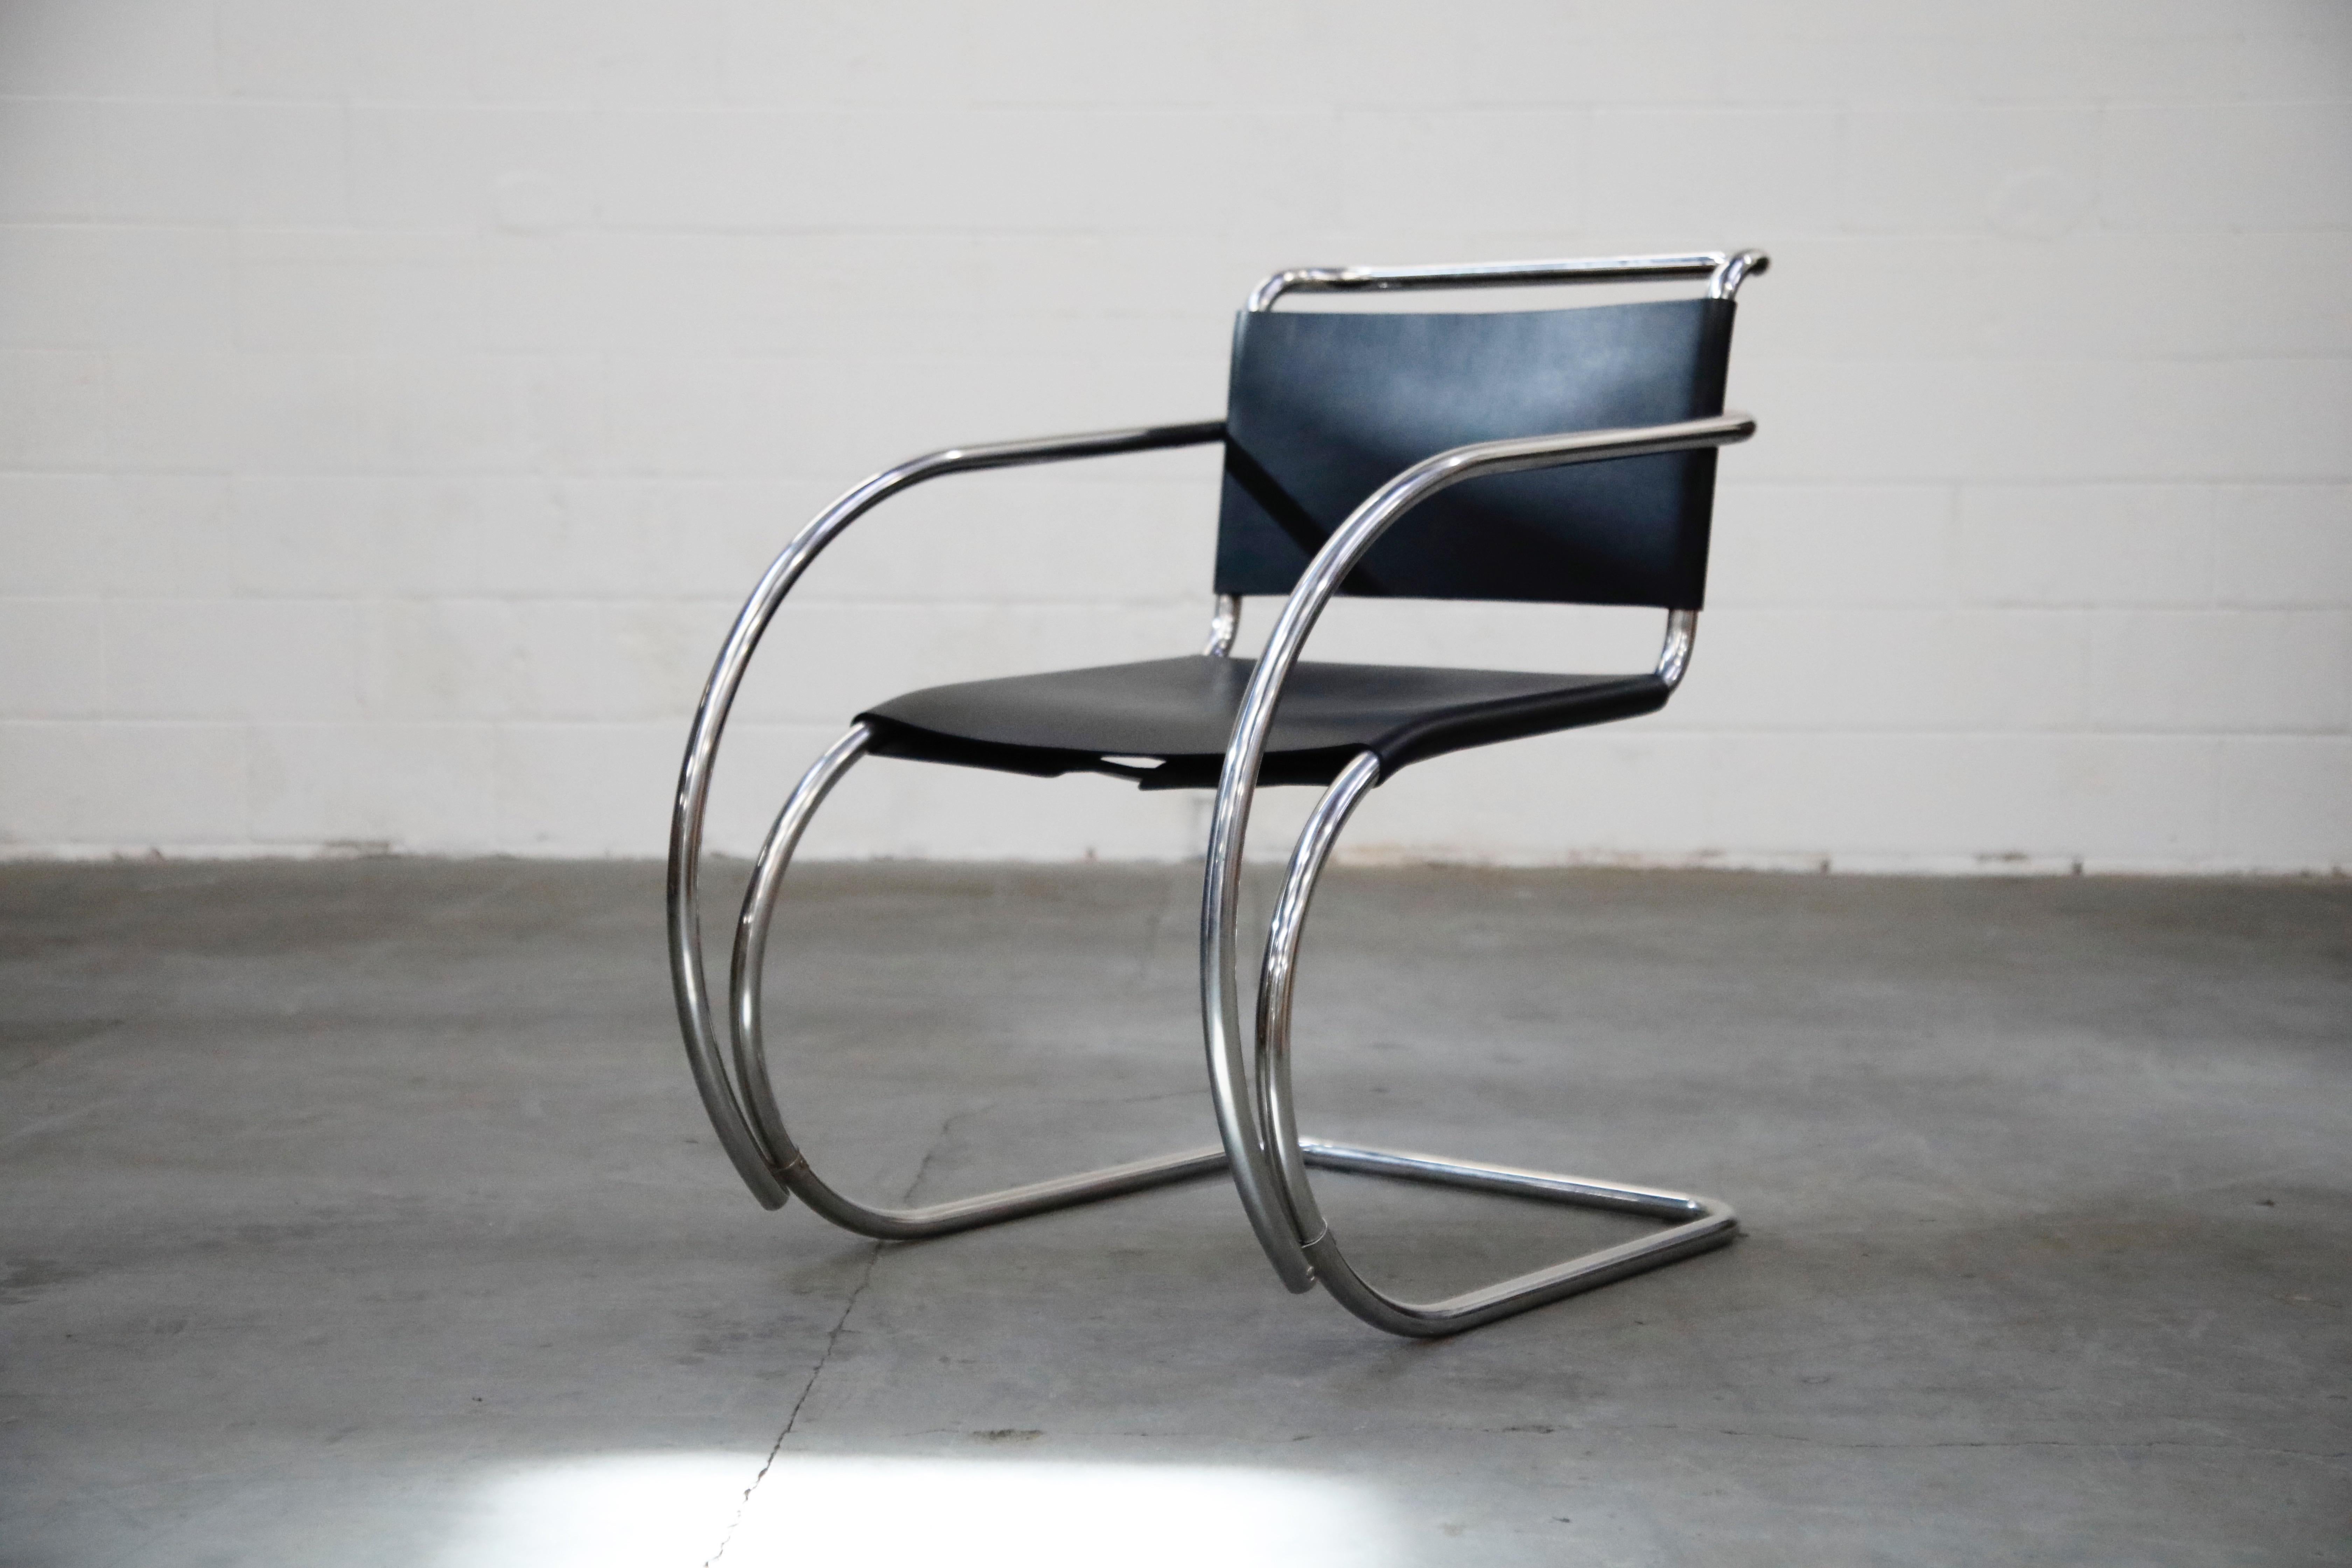 An incredible set of two (2) signed cantilevered MR 20 armchairs by Ludwig Mies van der Rohe for Knoll Studio. In excellent showroom condition, this collectible pair of arm chairs possess their original Knoll Made in Italy labels and the frames are